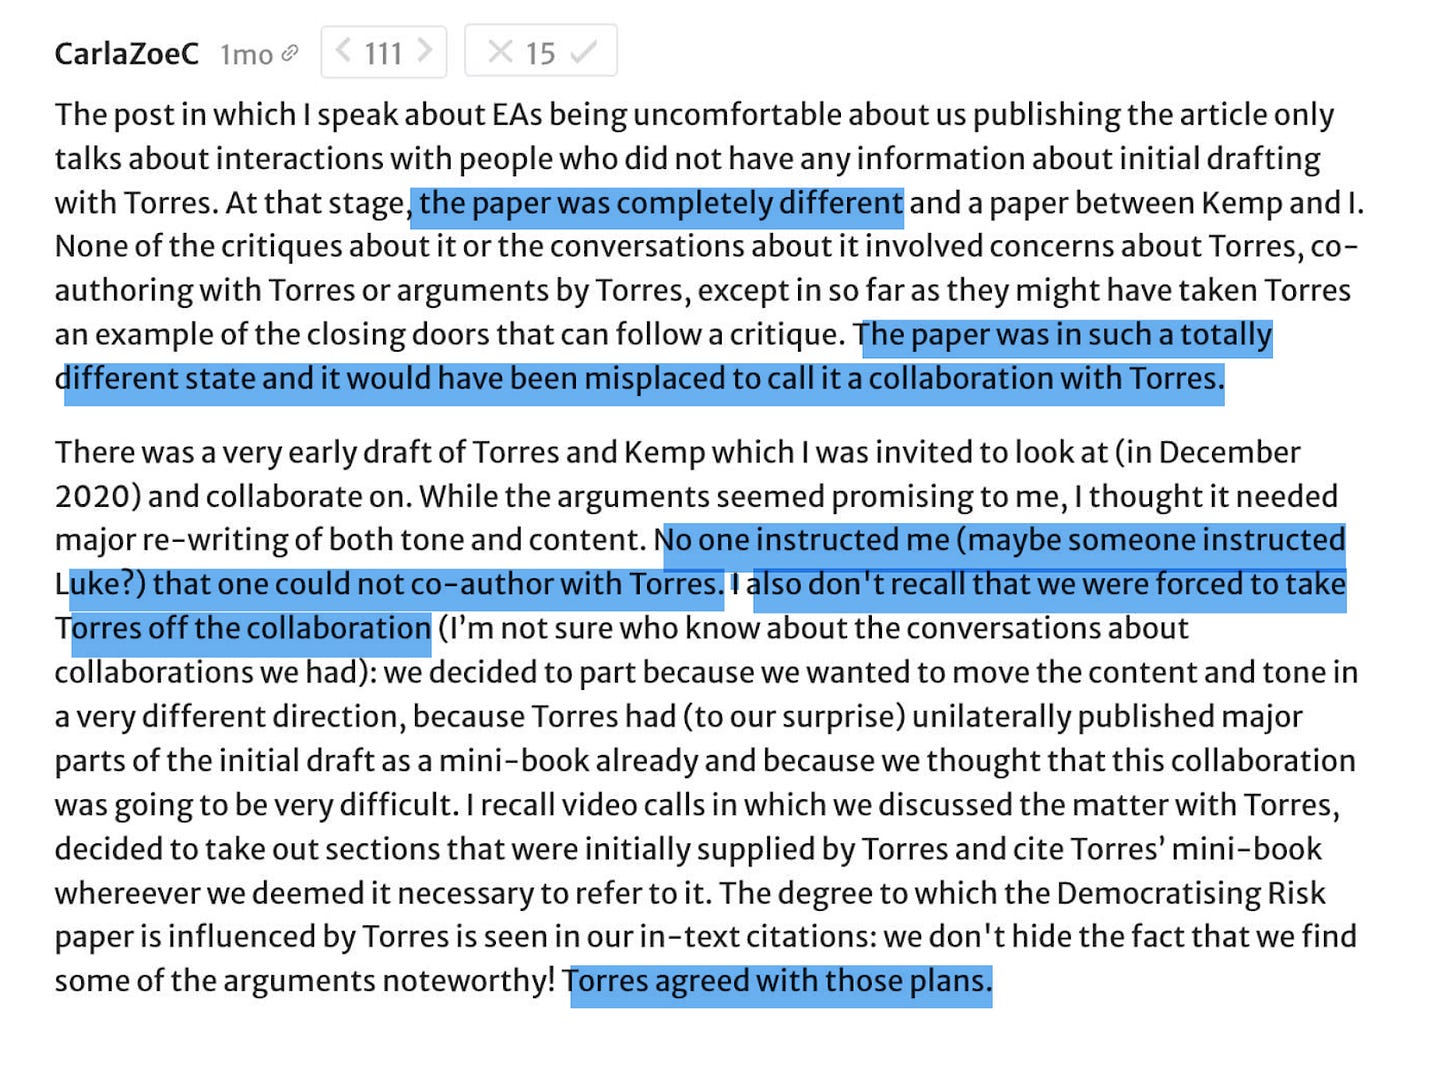 Carla Zoe: The post in which I speak about EAs being uncomfortable about us publishing the article only talks about interactions with people who did not have any information about initial drafting with Torres. At that stage, the paper was completely different and a paper between Kemp and I. None of the critiques about it or the conversations about it involved concerns about Torres, co-authoring with Torres or arguments by Torres, except in so far as they might have taken Torres an example of the closing doors that can follow a critique. The paper was in such a totally different state and it would have been misplaced to call it a collaboration with Torres.  There was a very early draft of Torres and Kemp which I was invited to look at (in December 2020) and collaborate on. While the arguments seemed promising to me, I thought it needed major re-writing of both tone and content. No one instructed me (maybe someone instructed Luke?) that one could not co-author with Torres. I also don't recall that we were forced to take Torres off the collaboration (I’m not sure who know about the conversations about collaborations we had): we decided to part because we wanted to move the content and tone in a very different direction, because Torres had (to our surprise) unilaterally published major parts of the initial draft as a mini-book already and because we thought that this collaboration was going to be very difficult. I recall video calls in which we discussed the matter with Torres, decided to take out sections that were initially supplied by Torres and cite Torres’ mini-book wherever we deemed it necessary to refer to it. The degree to which the Democratising Risk paper is influenced by Torres is seen in our in-text citations: we don't hide the fact that we find some of the arguments noteworthy! Torres agreed with those plans. 